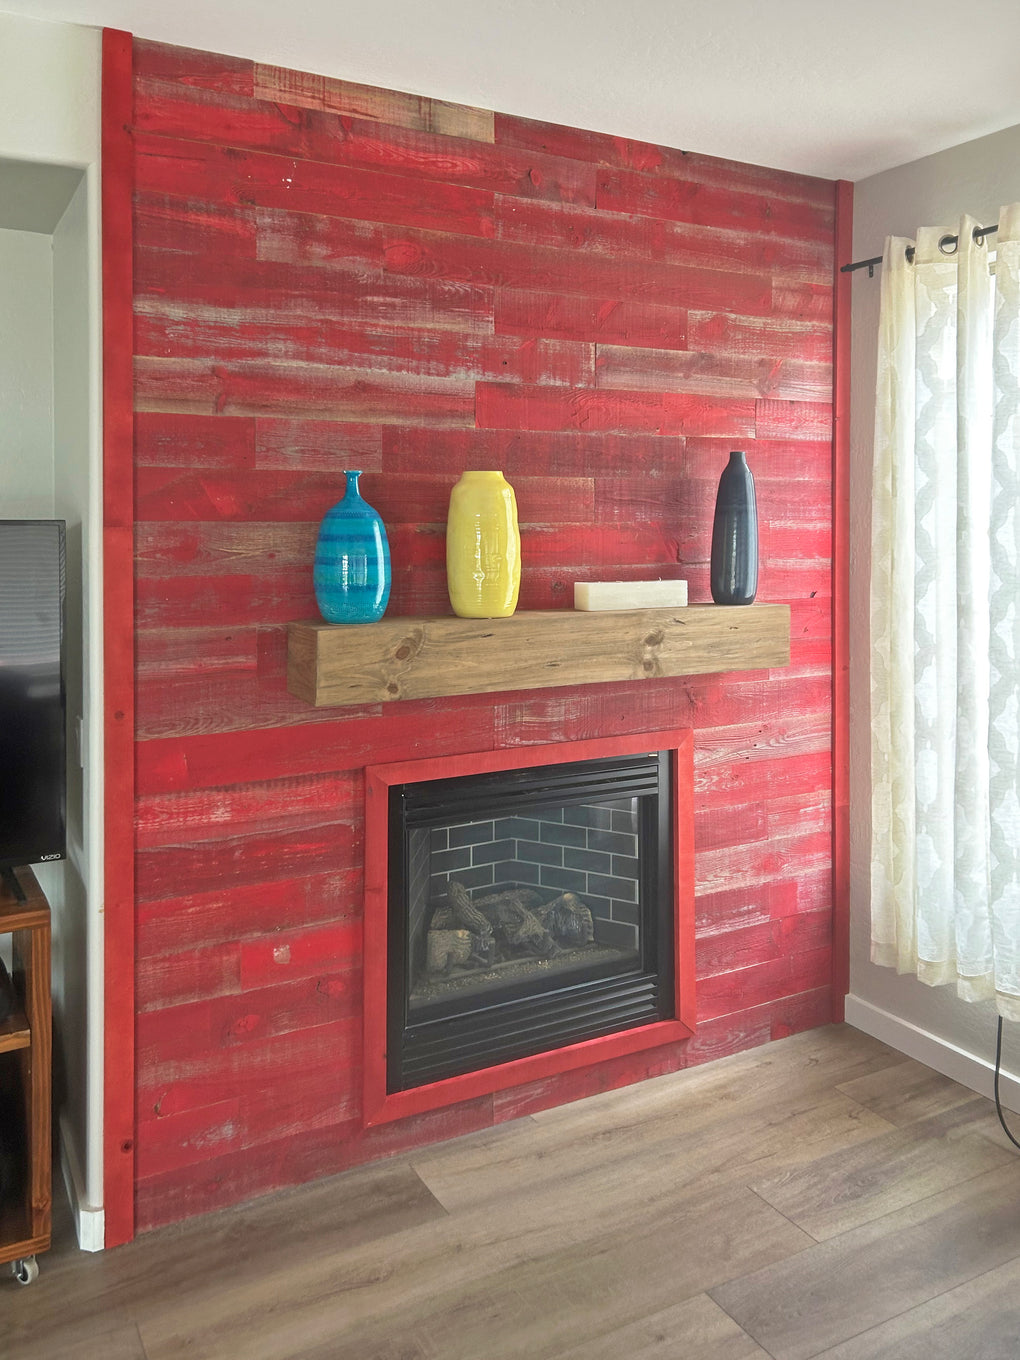 Painted red barn wood fireplace surround with 3 colorful vases on a mantel.